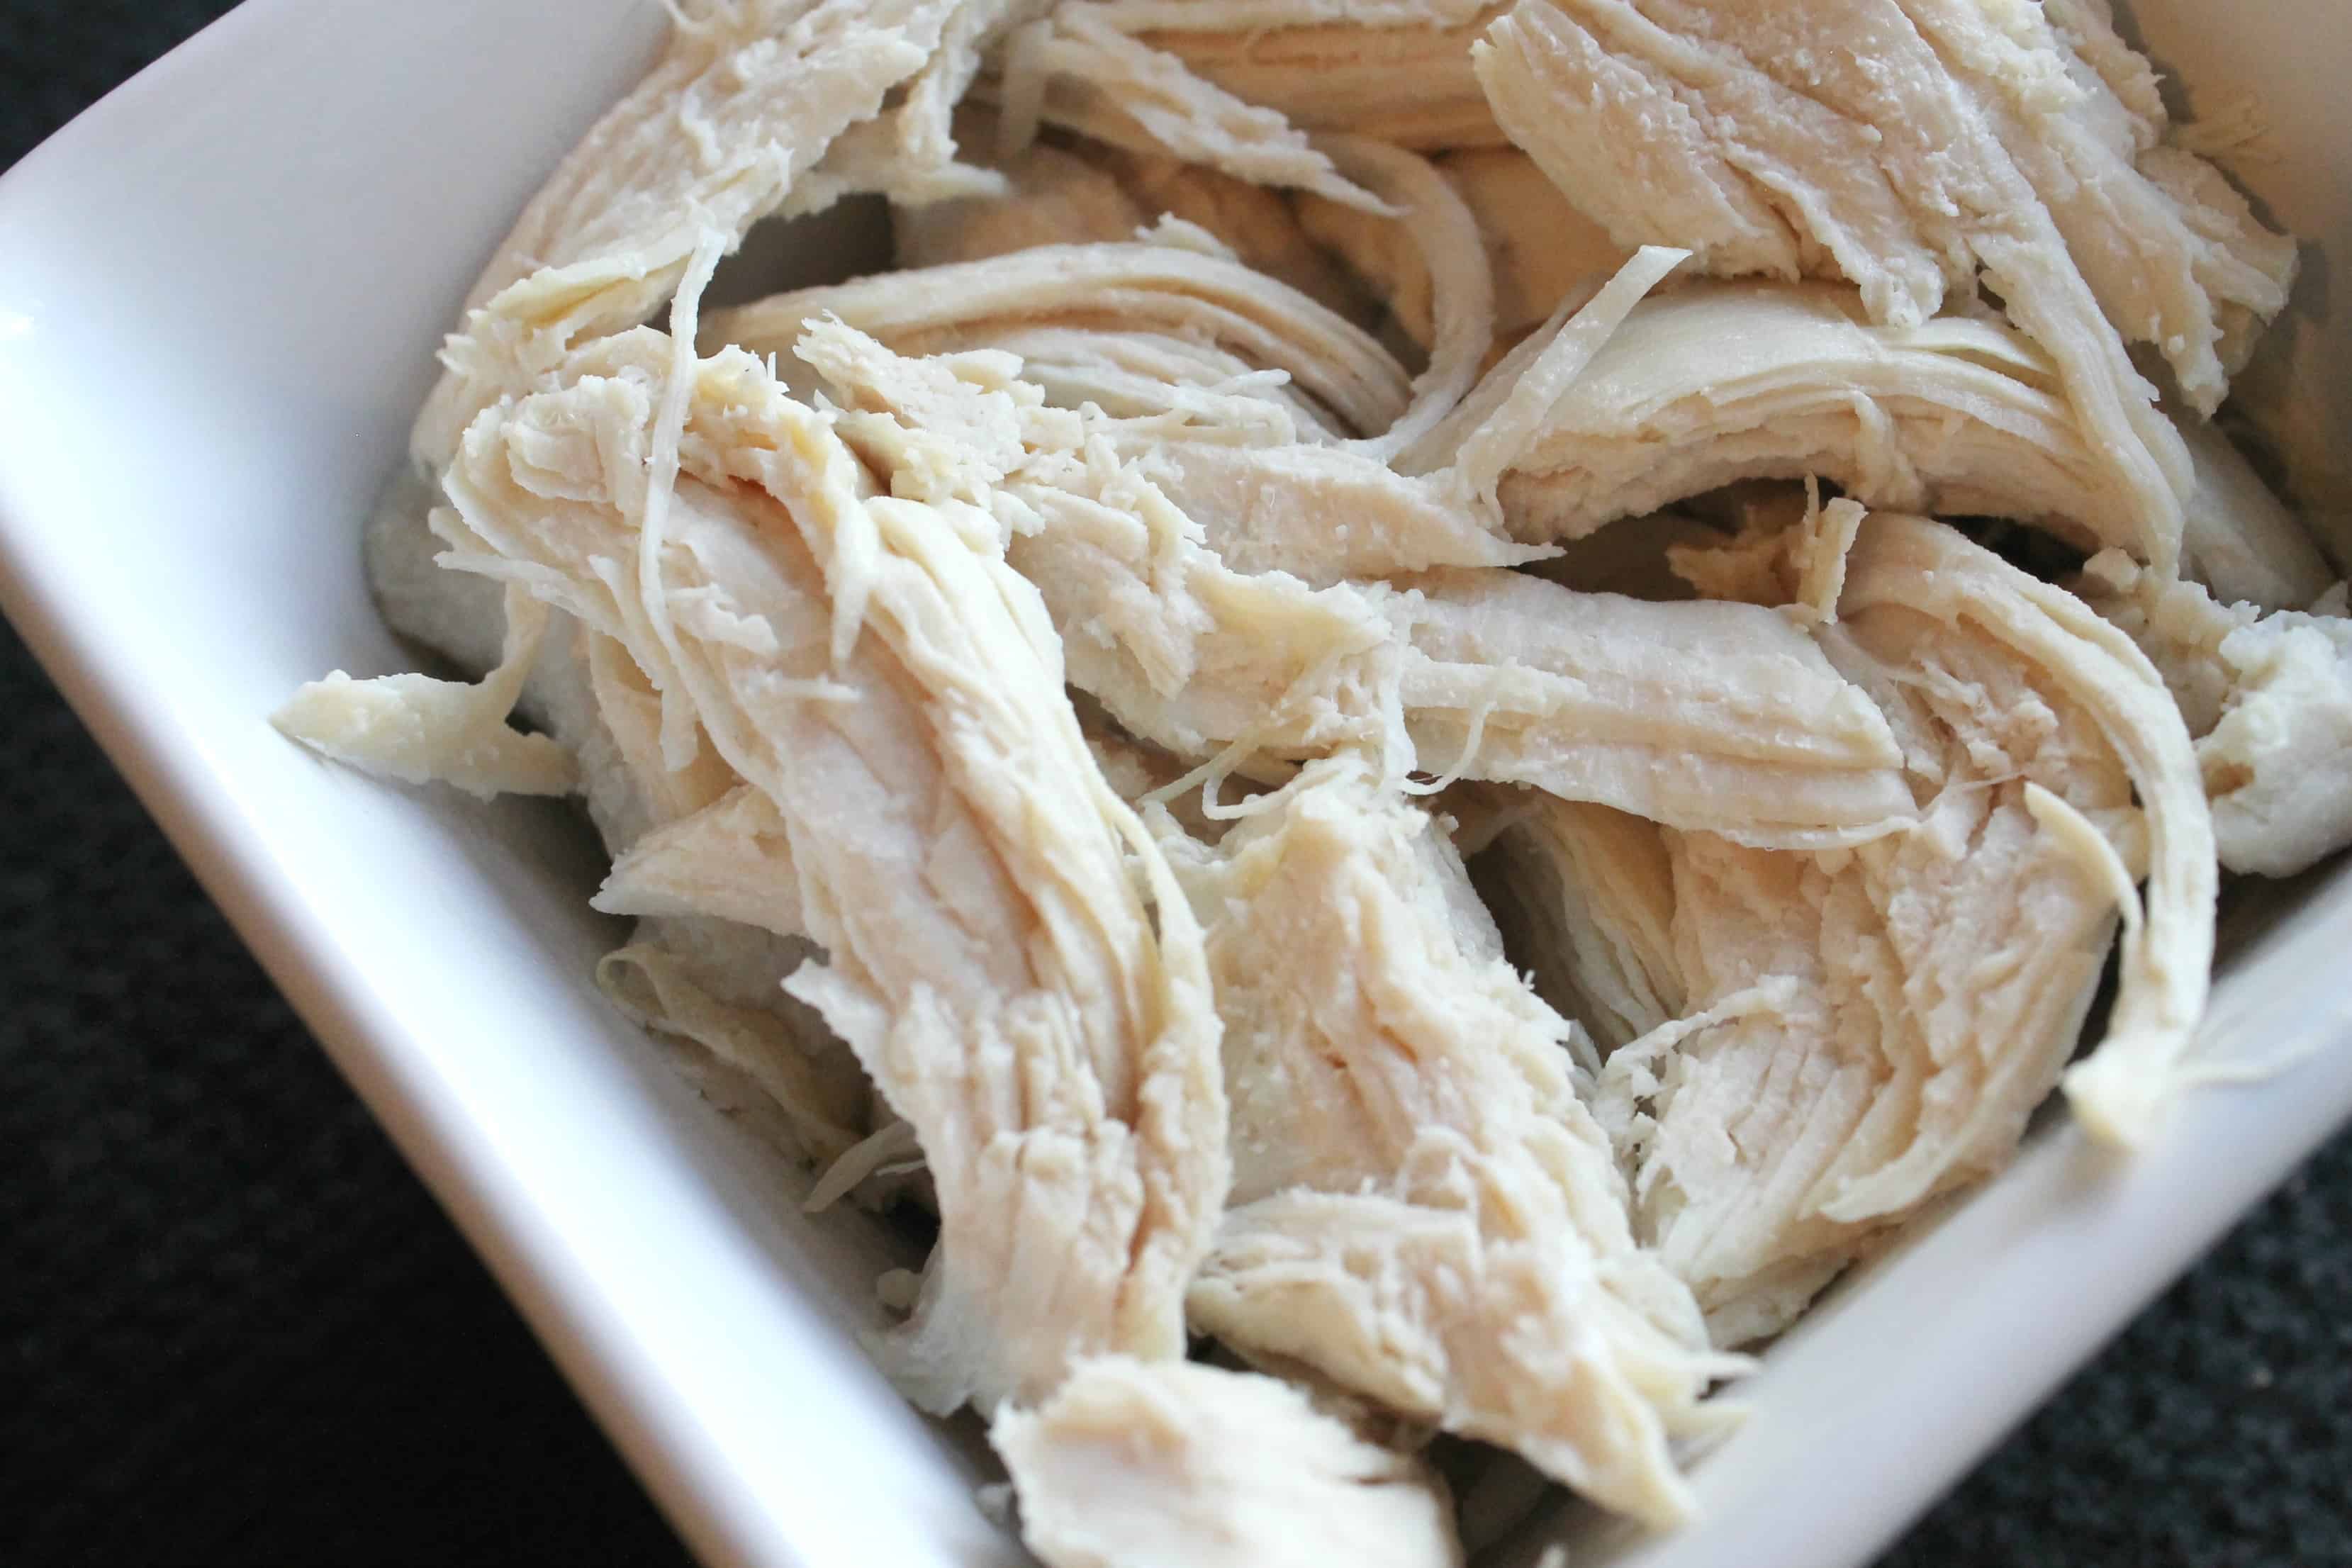 The Perfect Chicken with Ninja® Foodi™ Pressure Cooker - Peyton's Momma™